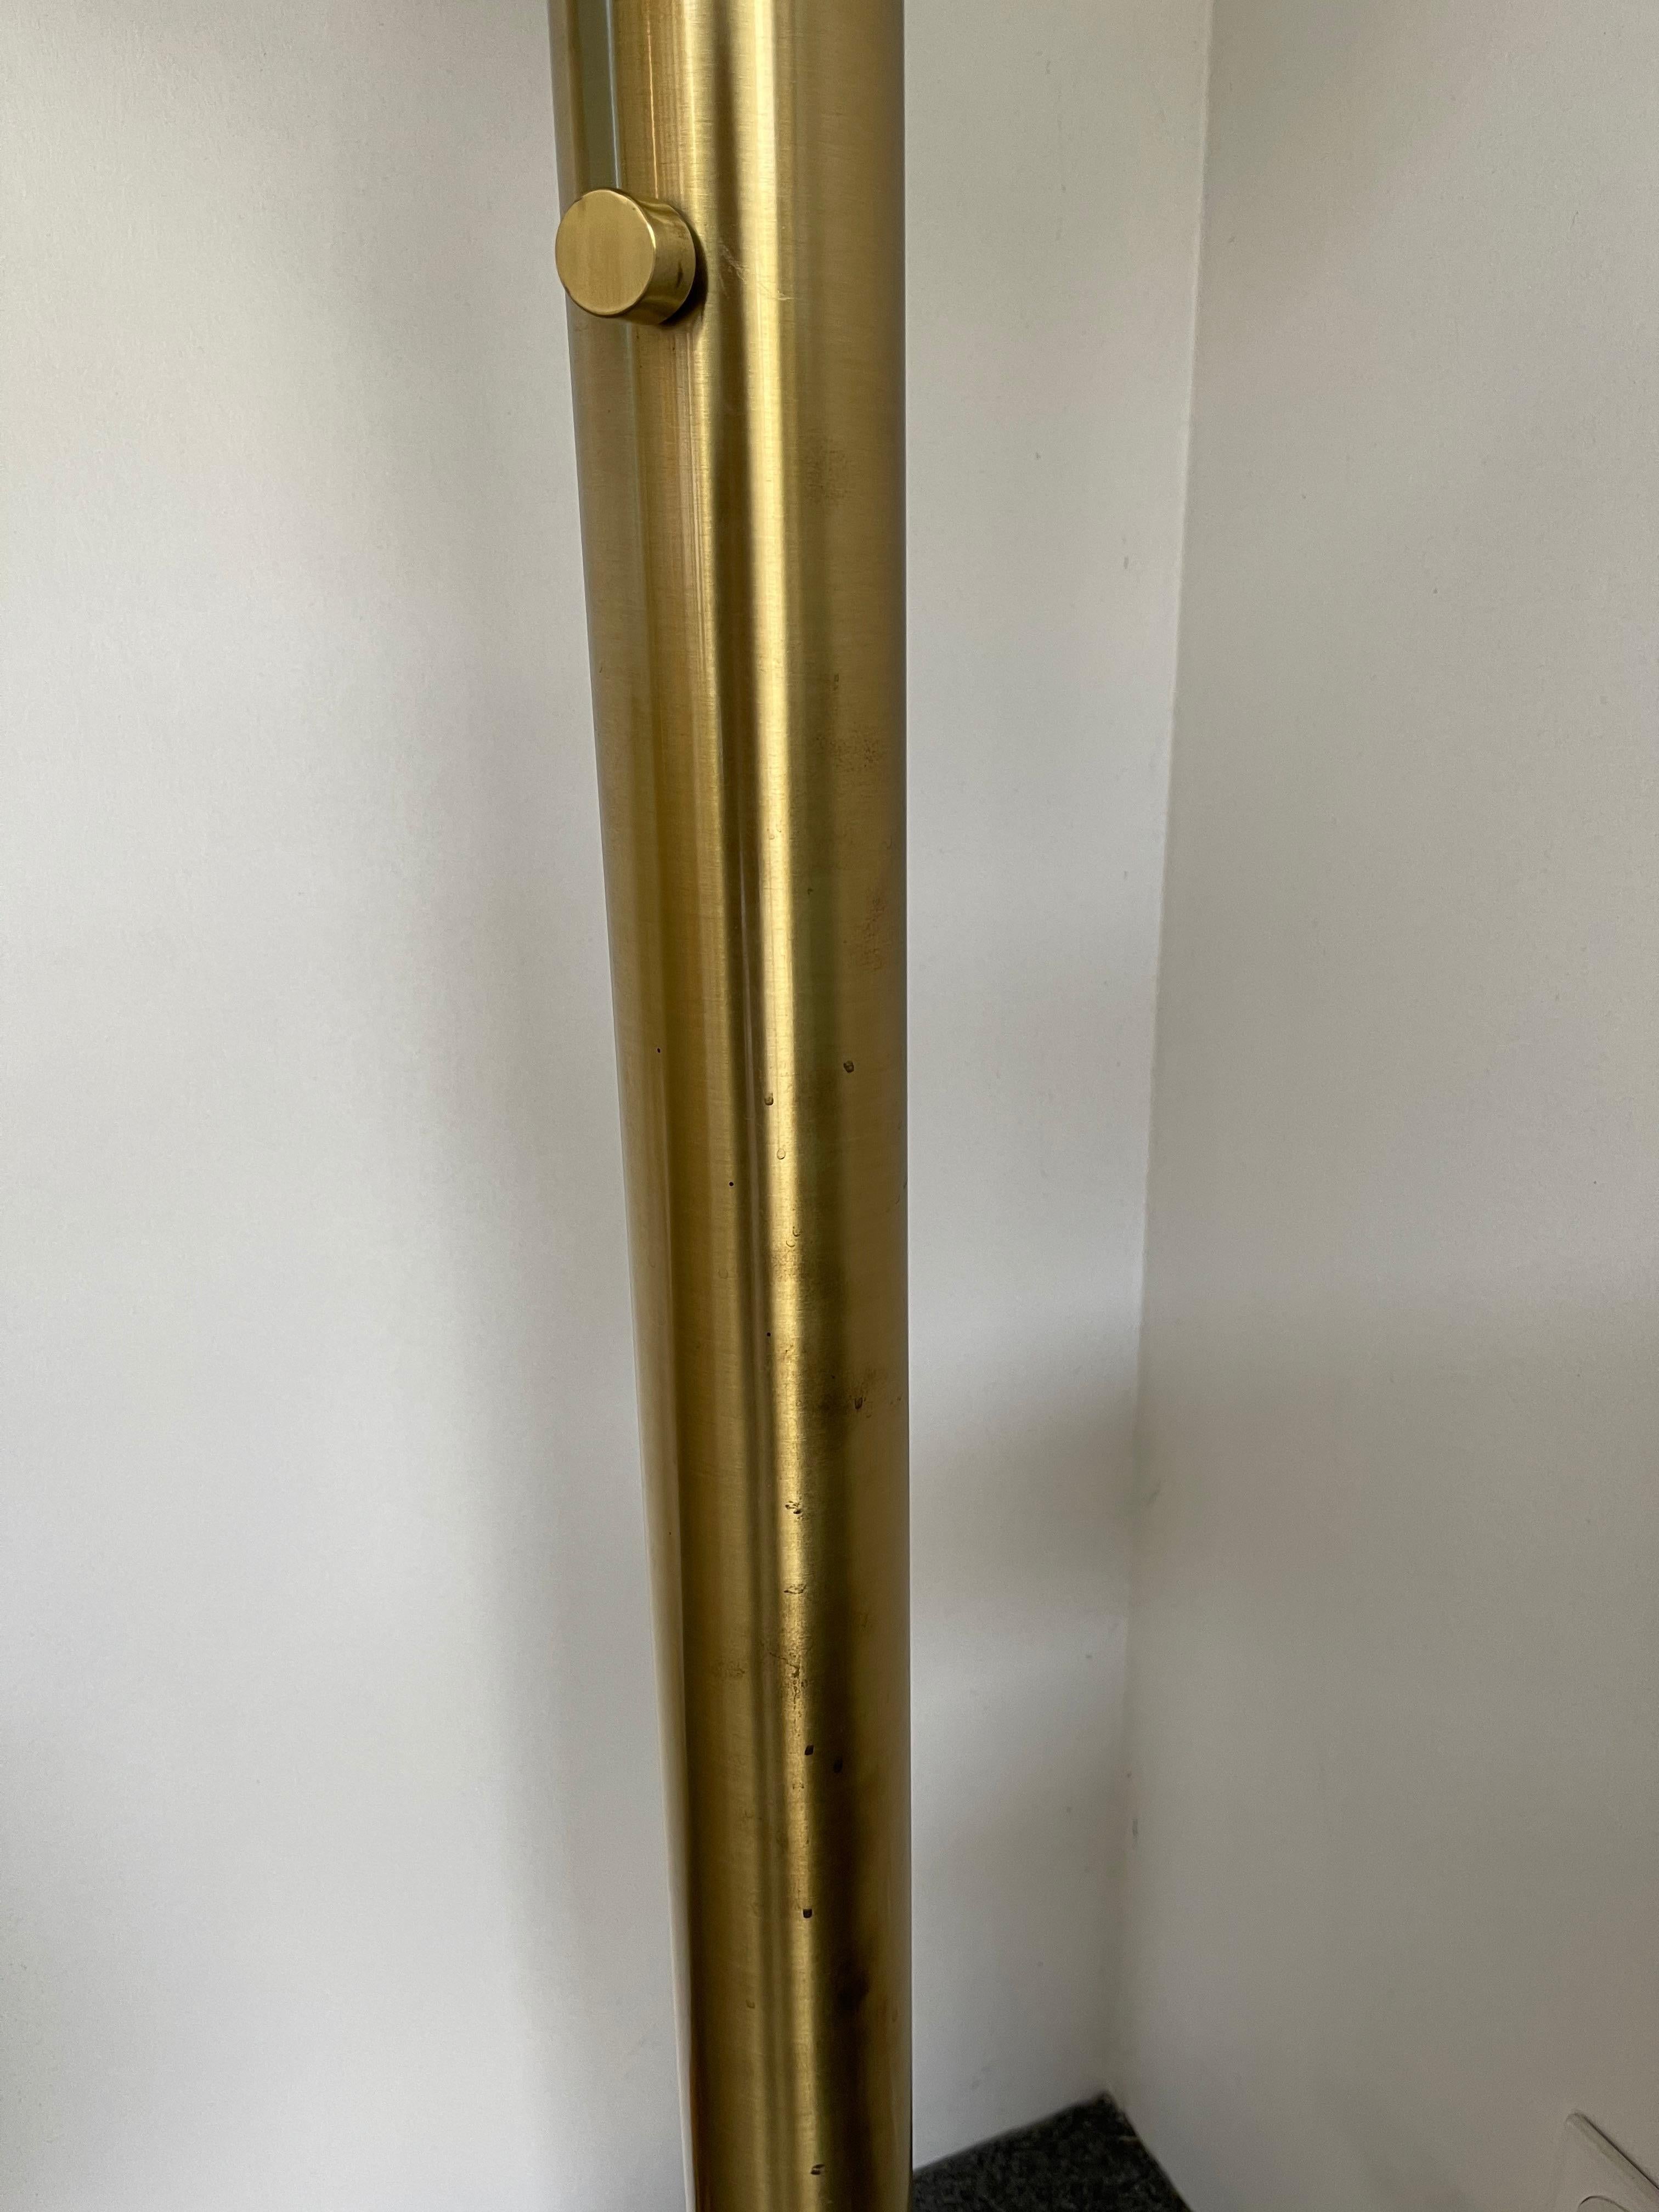 Late 20th Century Brass and Glass Floor Lamp P428 by Pia Guidetti Crippa for Luci, Italy, 1970s